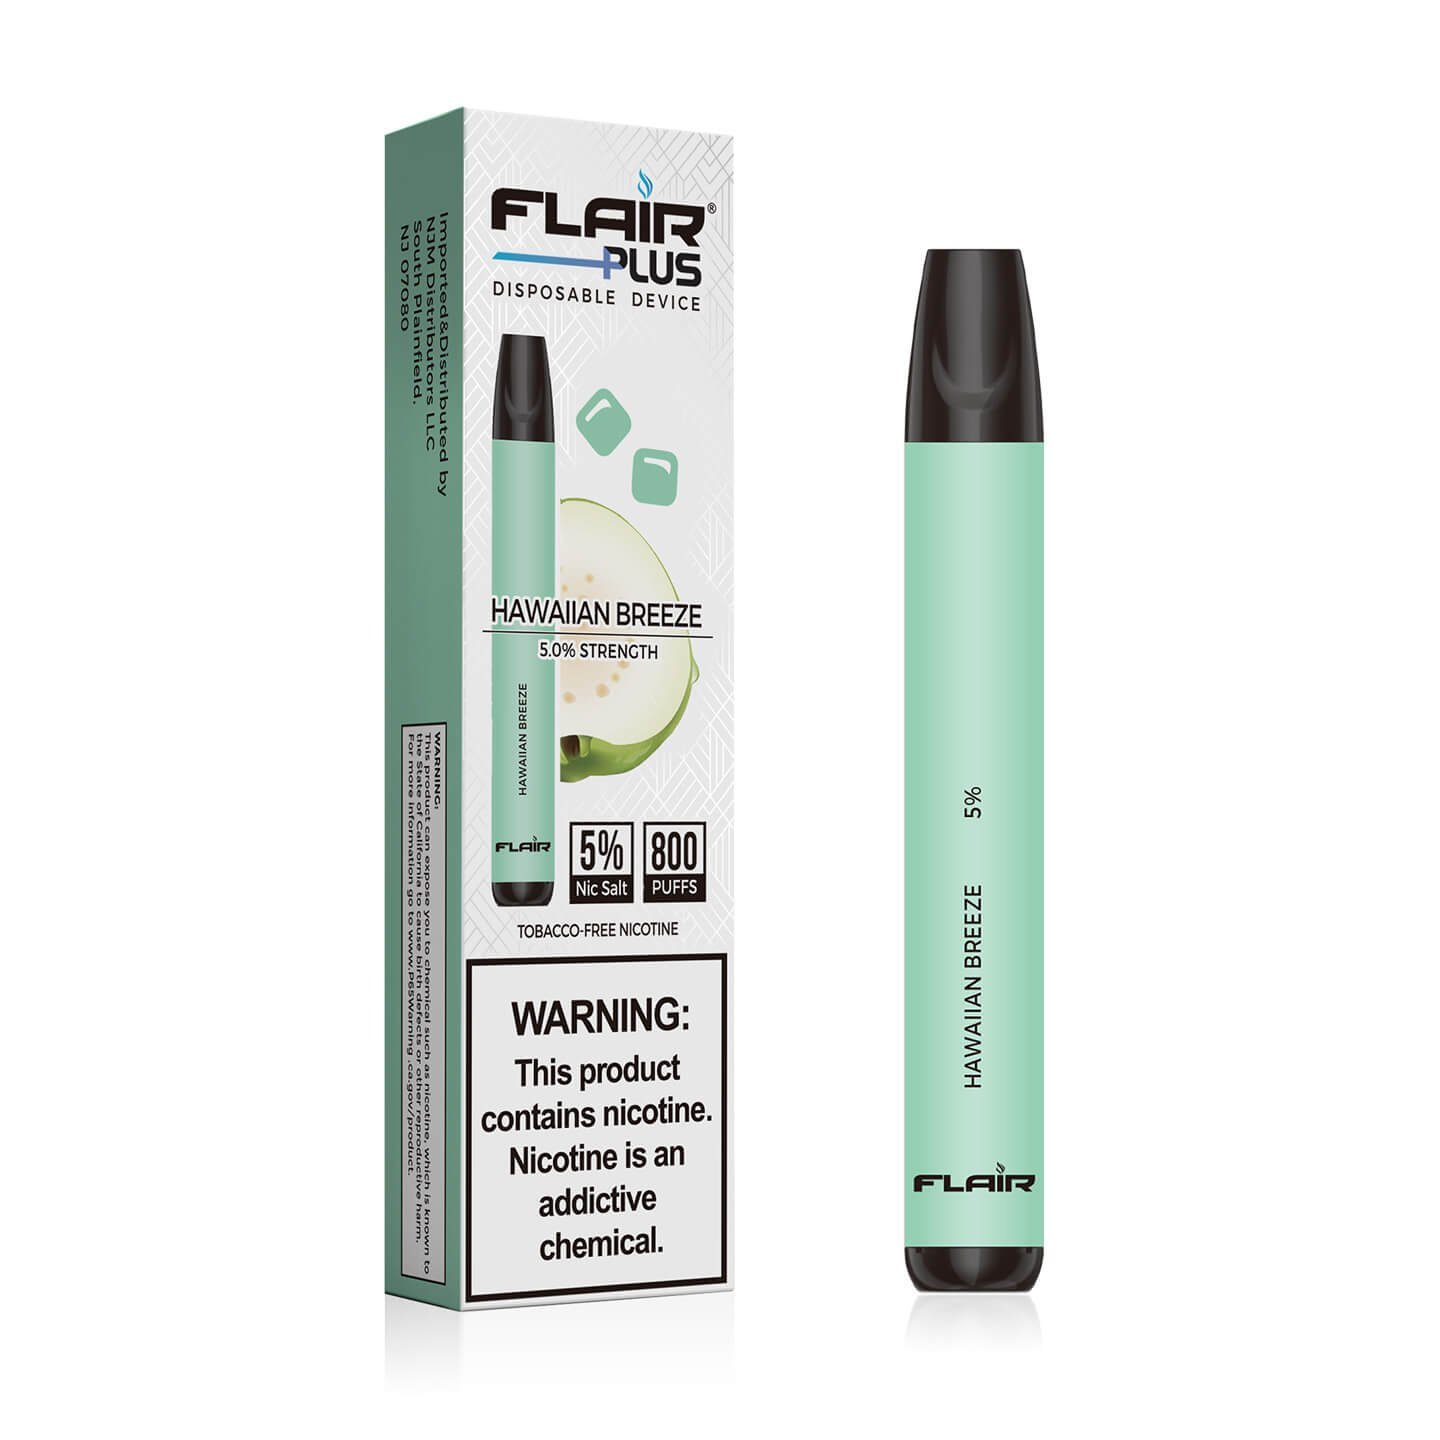 Flair Plus Disposable Devices (Hawaiian Breeze - 800 Puffs)